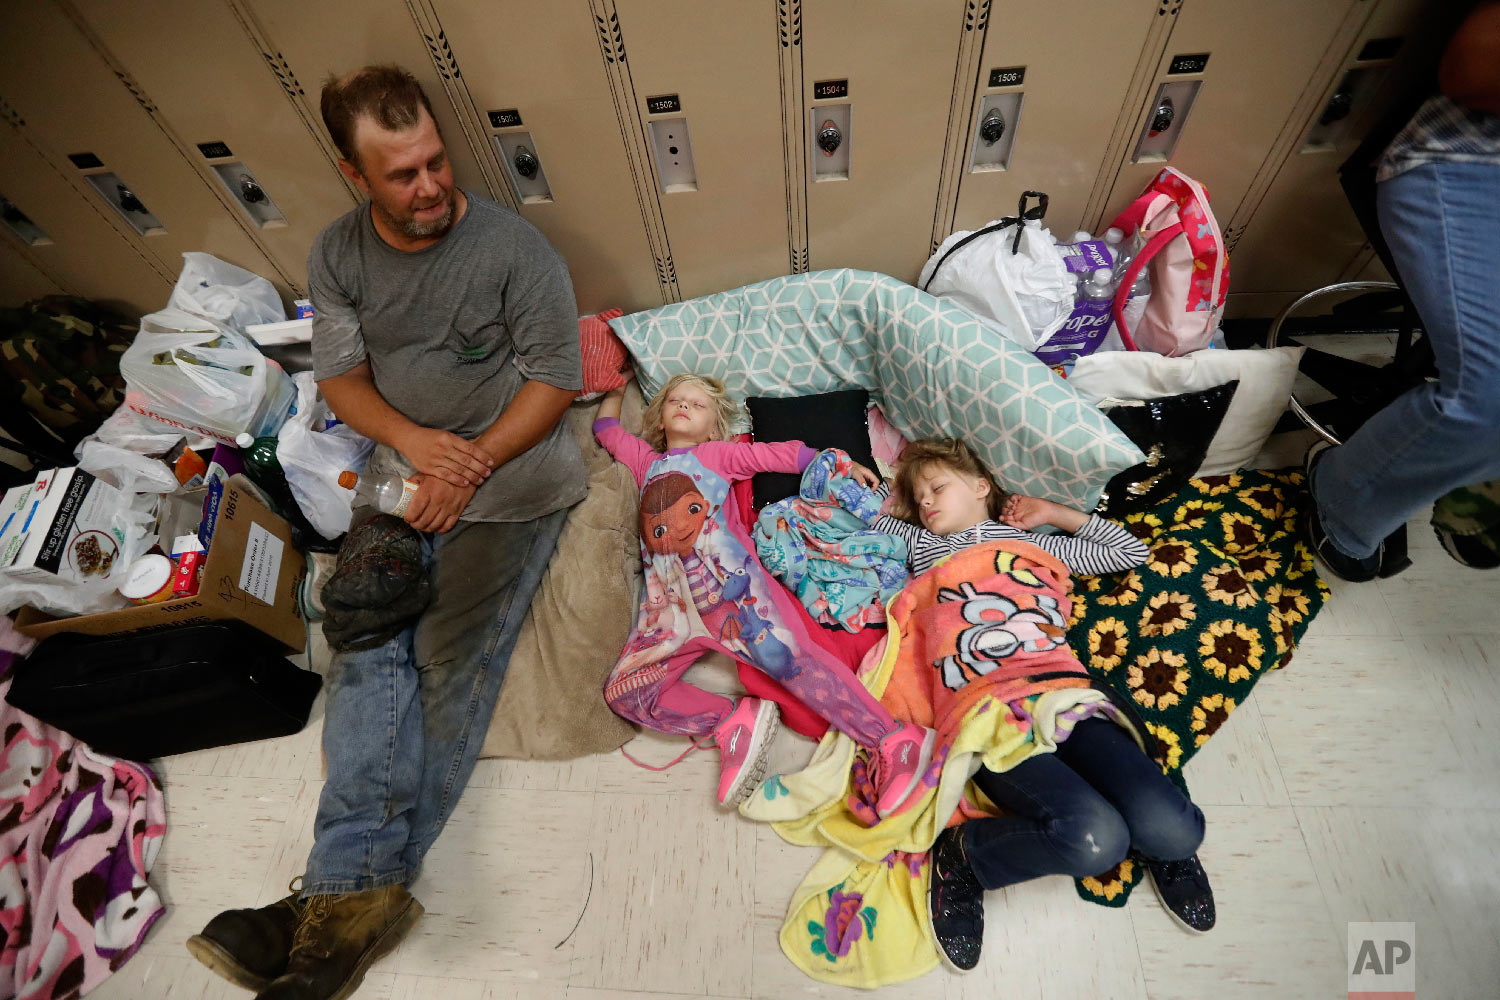  Earnest Sweet sits while his daughters Terri, 4, center, and Anna, 7, sleep at an evacuation shelter set up at Rutherford High School in Panama City Beach, Fla., in advance of Hurricane Michael, which is expected to make landfall on Oct. 10, 2018. (